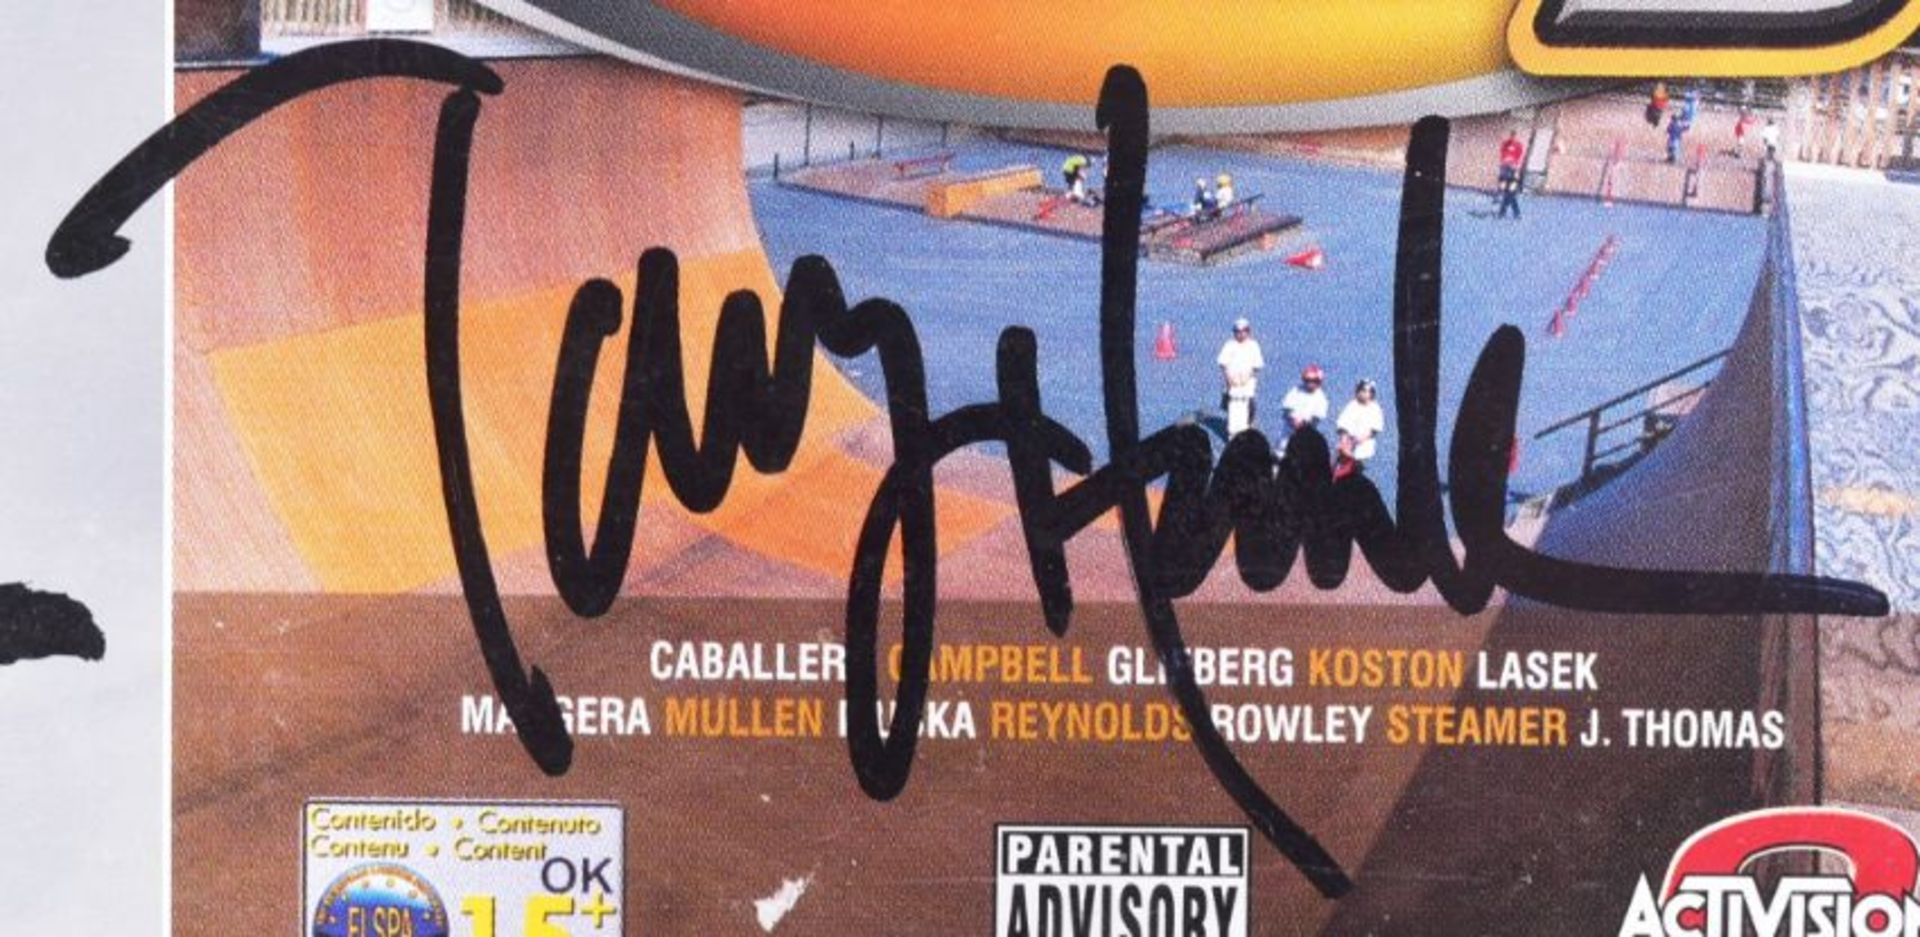 TONY HAWK - SKATEBOARDED - AUTOGRAPHED PS2 PROSKATER 3 GAME - Image 2 of 4